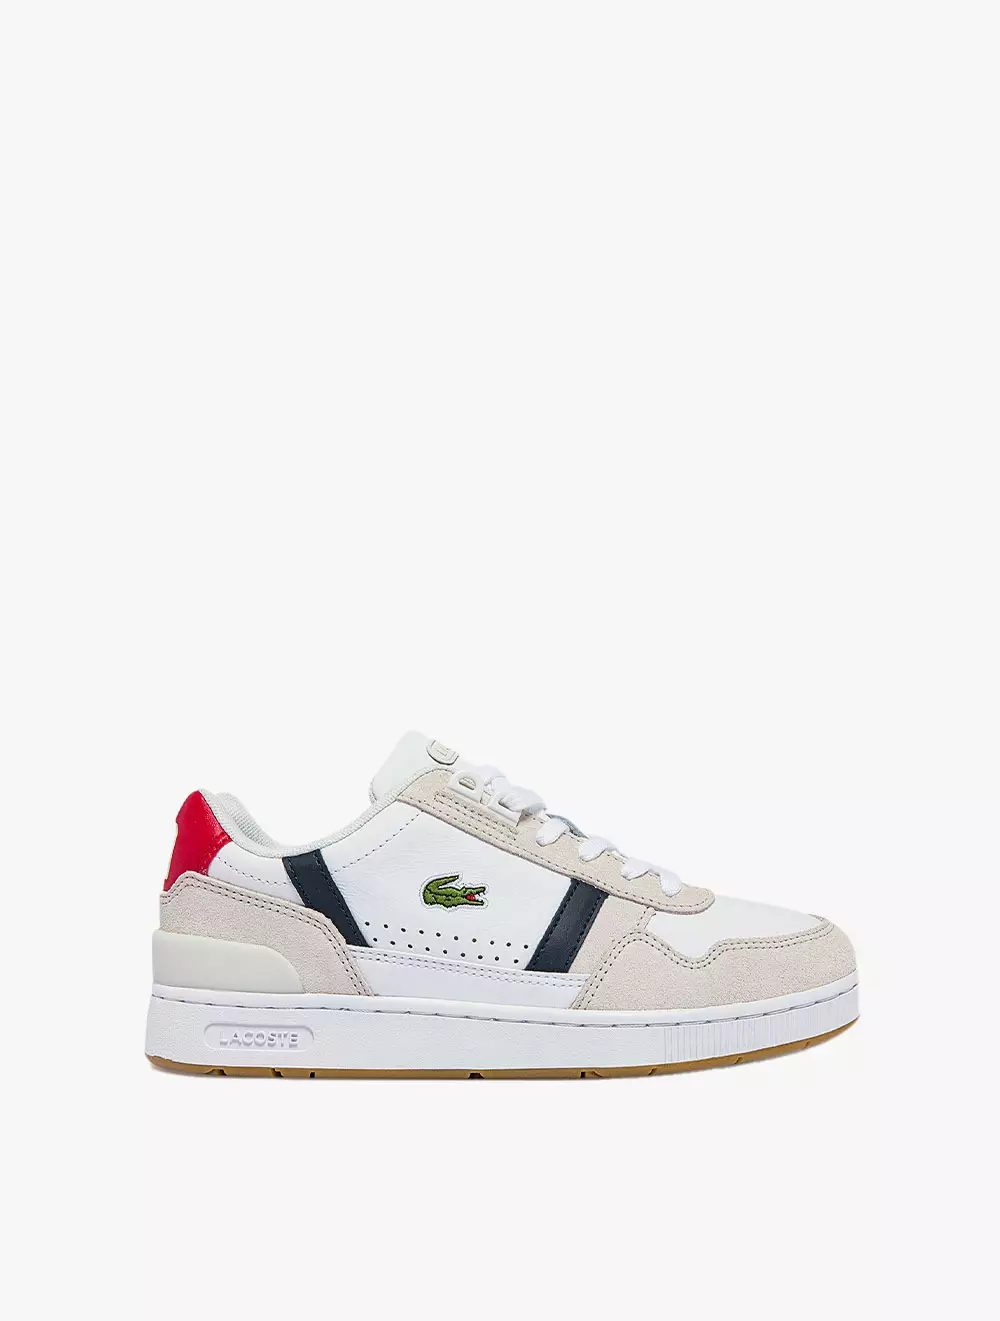 Jual Lacoste Women's T-Clip Tricolour Leather and Suede Trainers ...